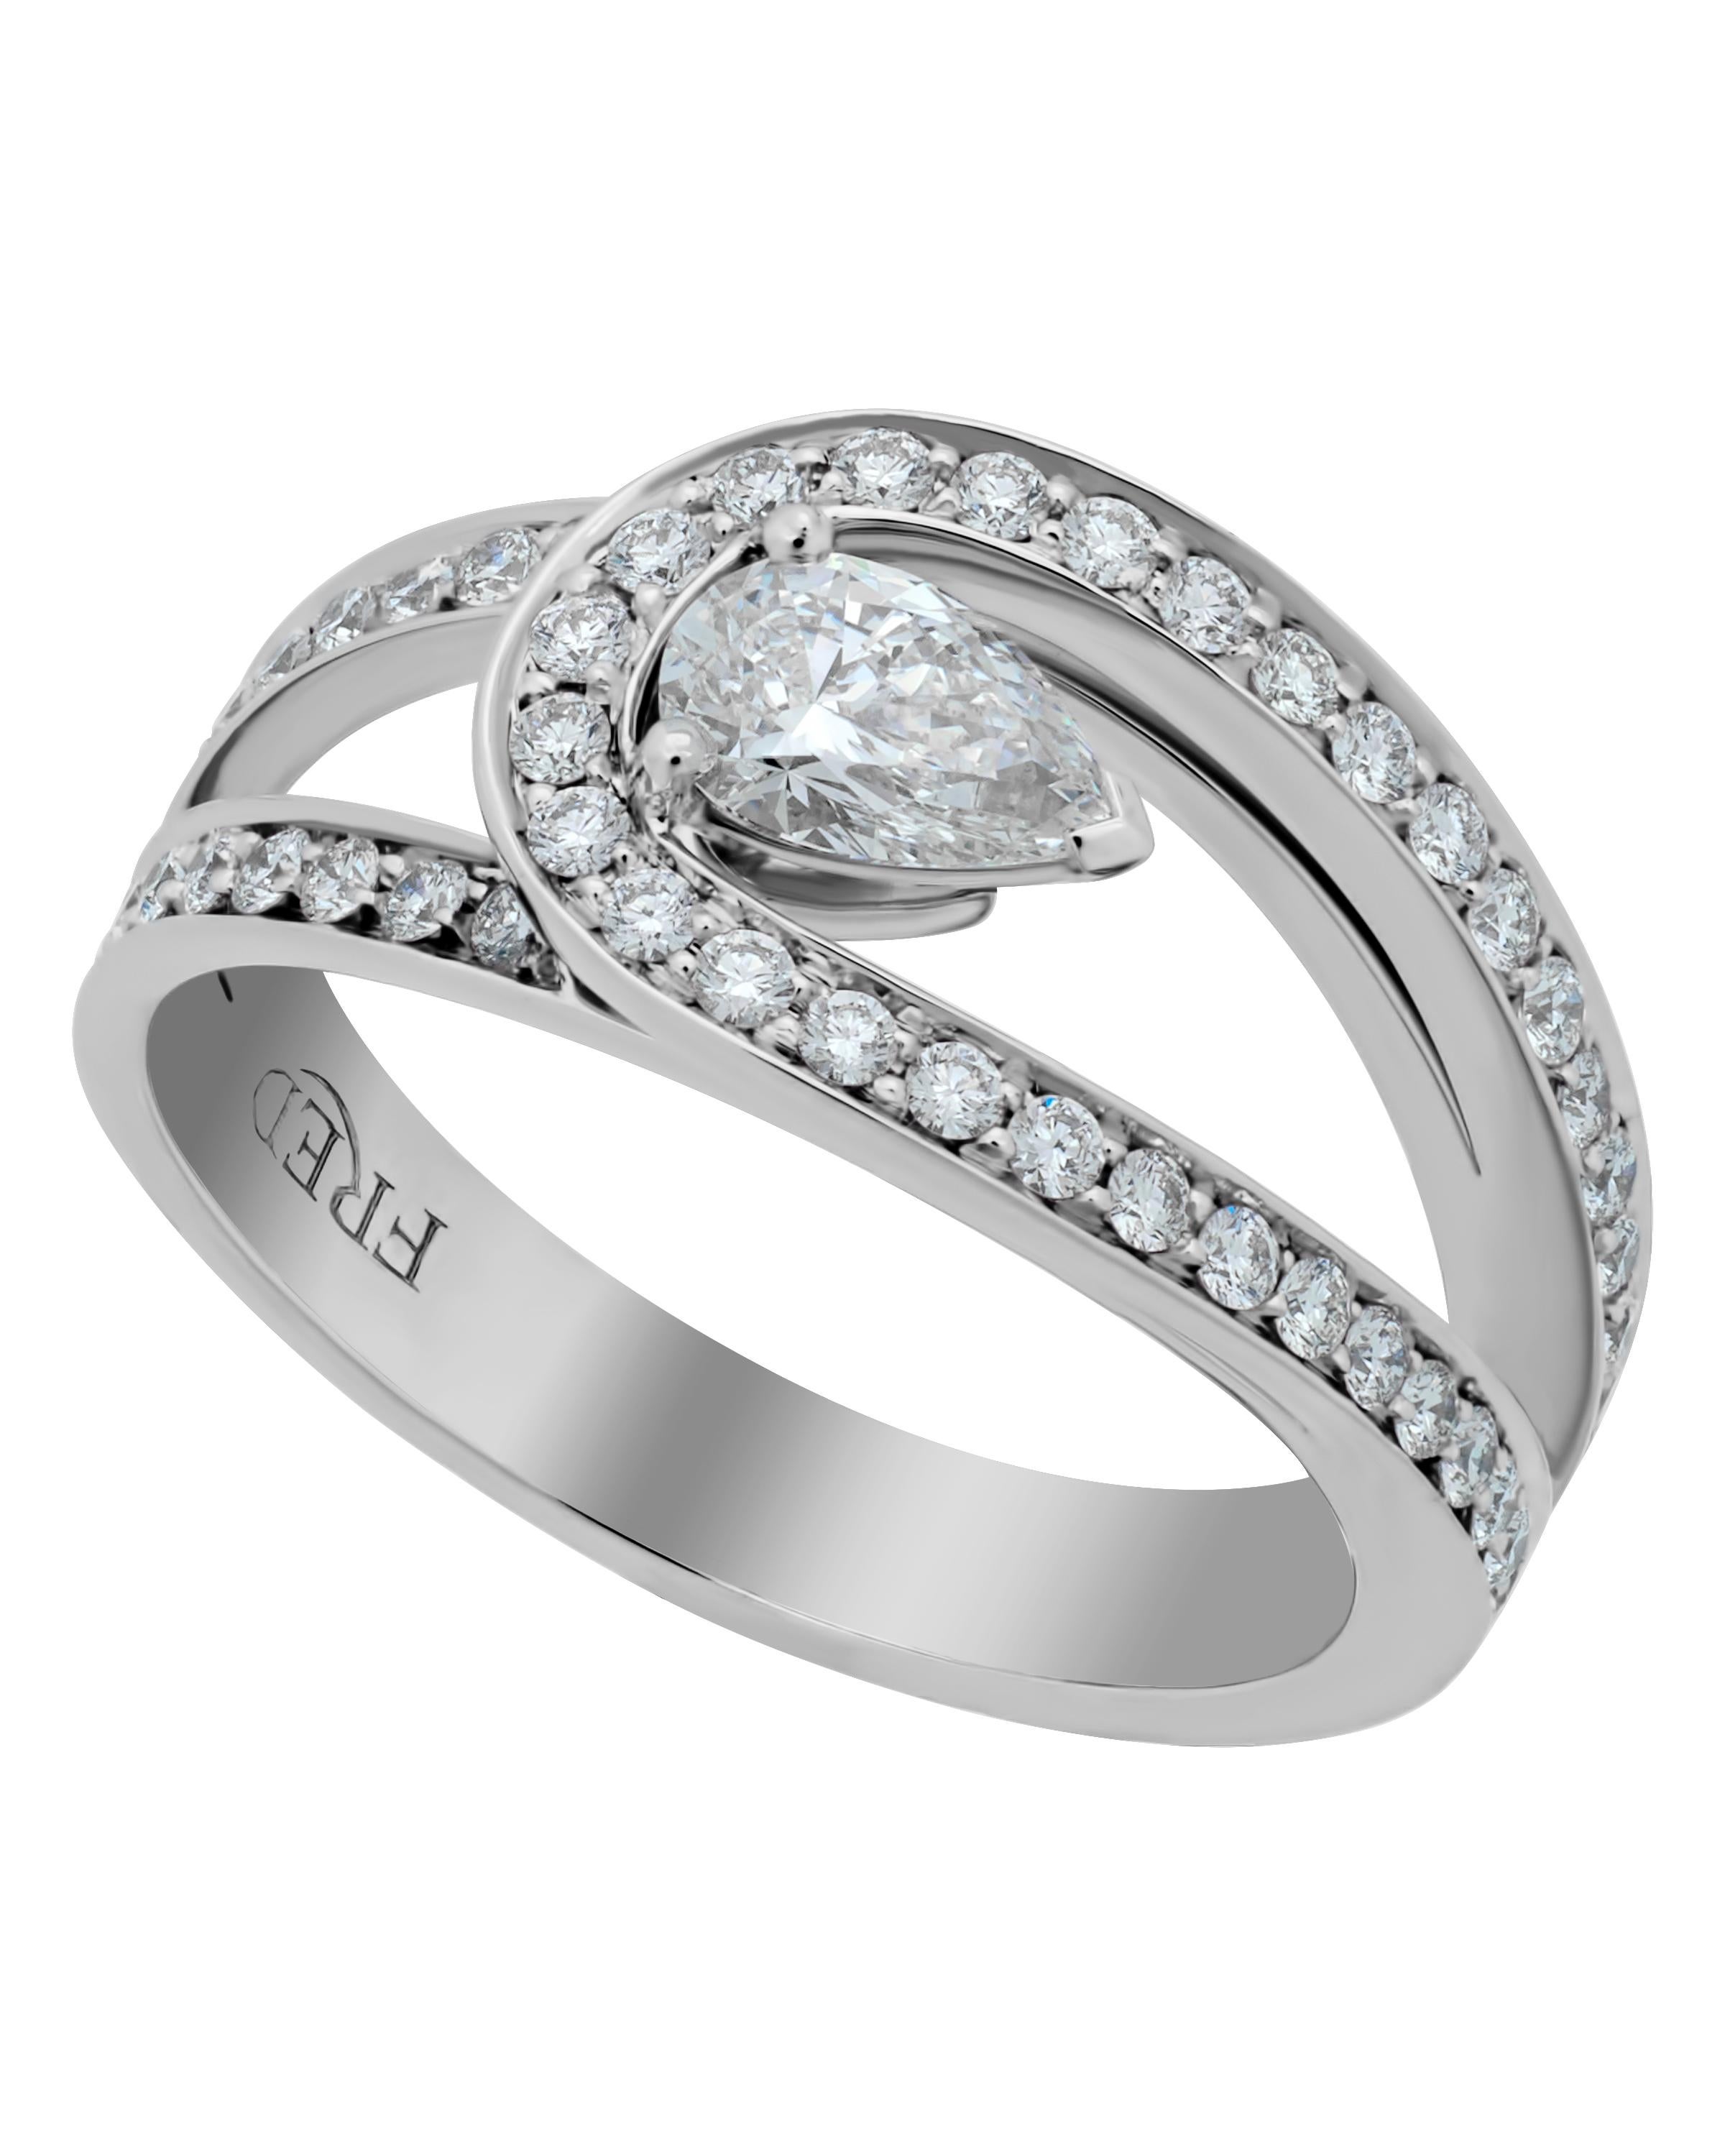 FRED Lovelight platinum Ring features 0.32ct. F-VVS1 pear cut diamond center with color and clarity: F, VVS1 shimmering with 0.55ct. tw. pavé diamonds. The ring size is 5.75 (51.3). The weight is 8.5g.
